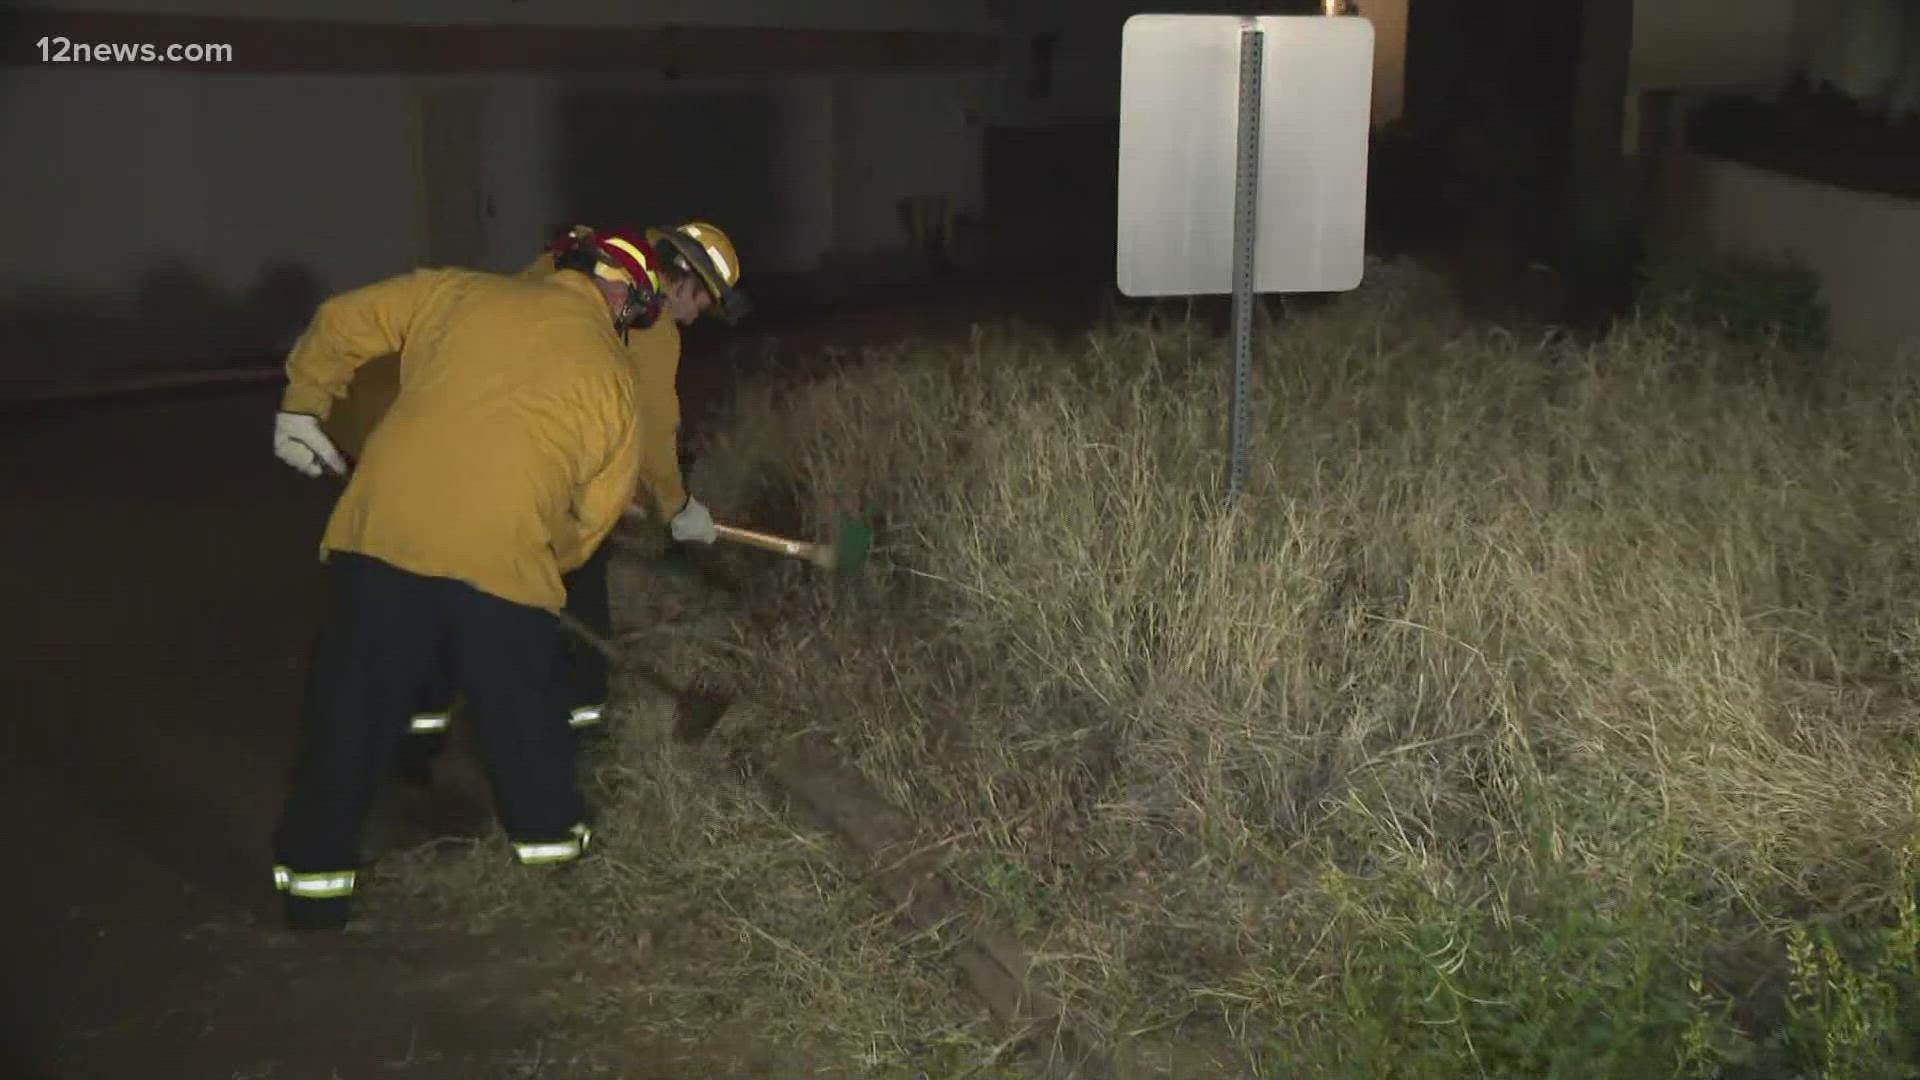 As wildfire season approaches in Arizona, residents are advised to get rid of what can fuel fires such as dead grass and weeds around their homes.